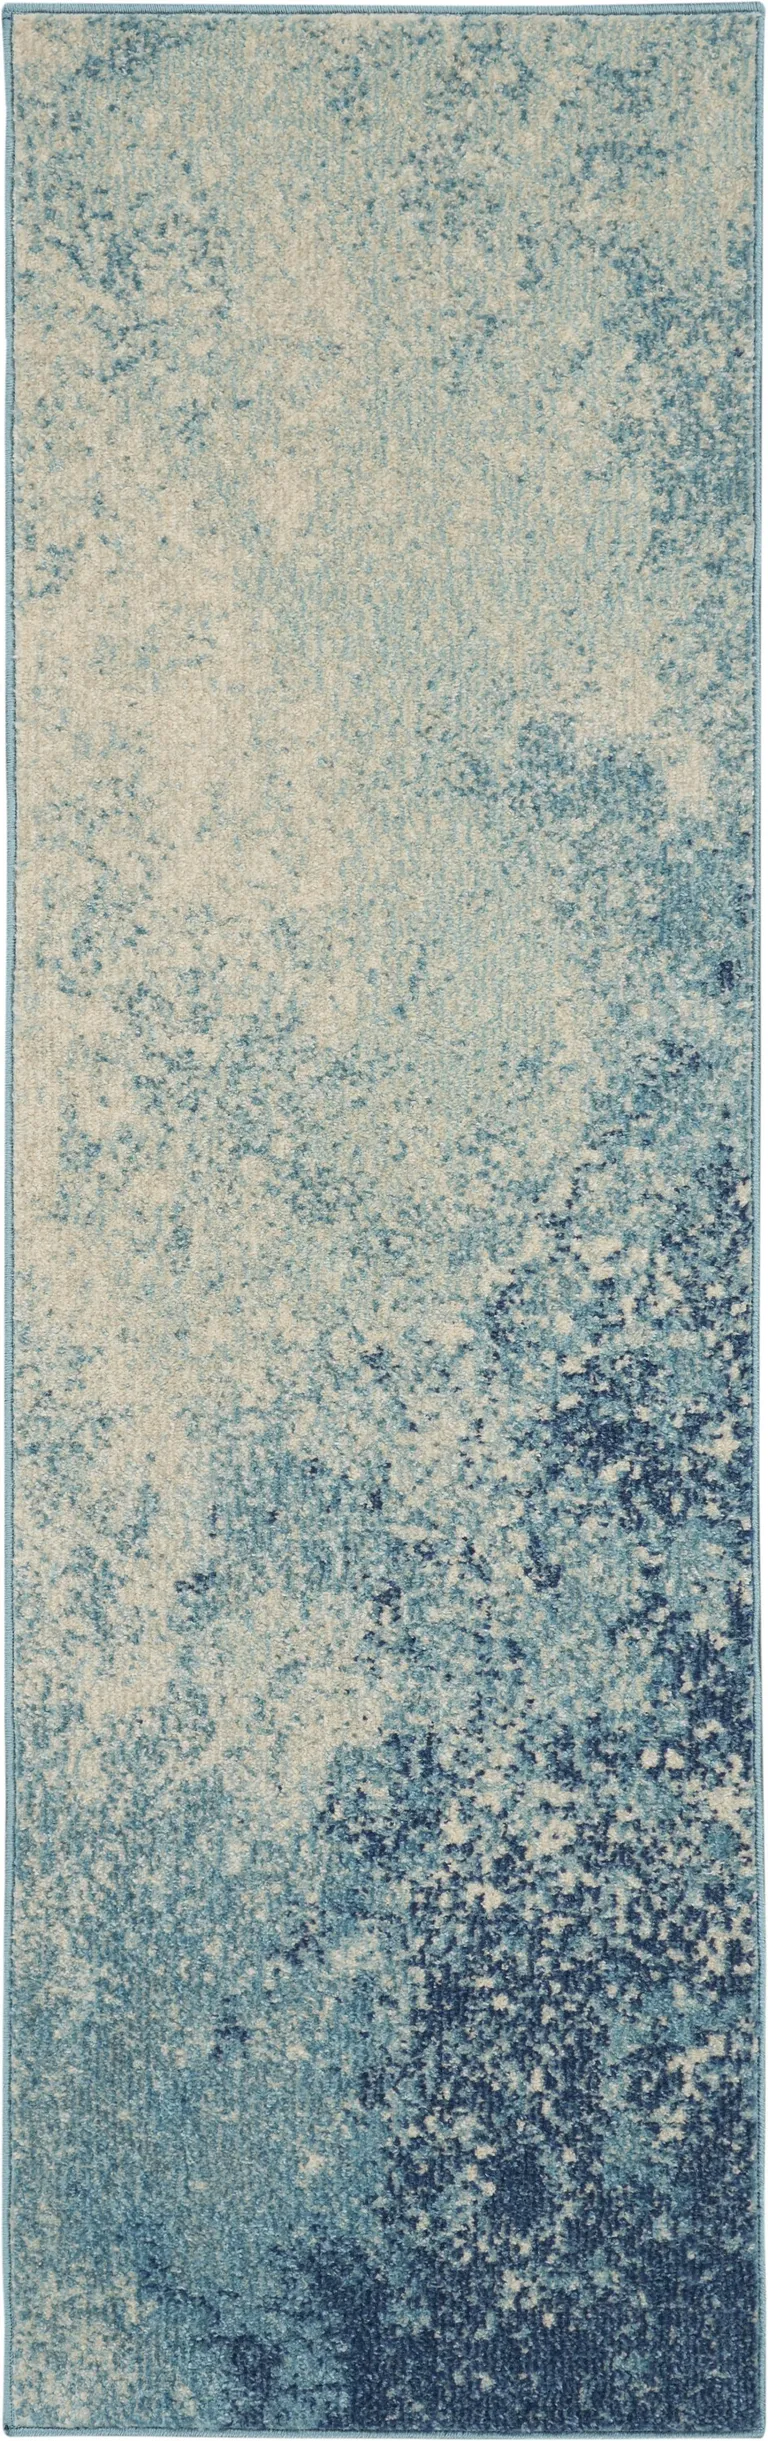 Light Blue and Ivory Abstract Sky Runner Rug Photo 1